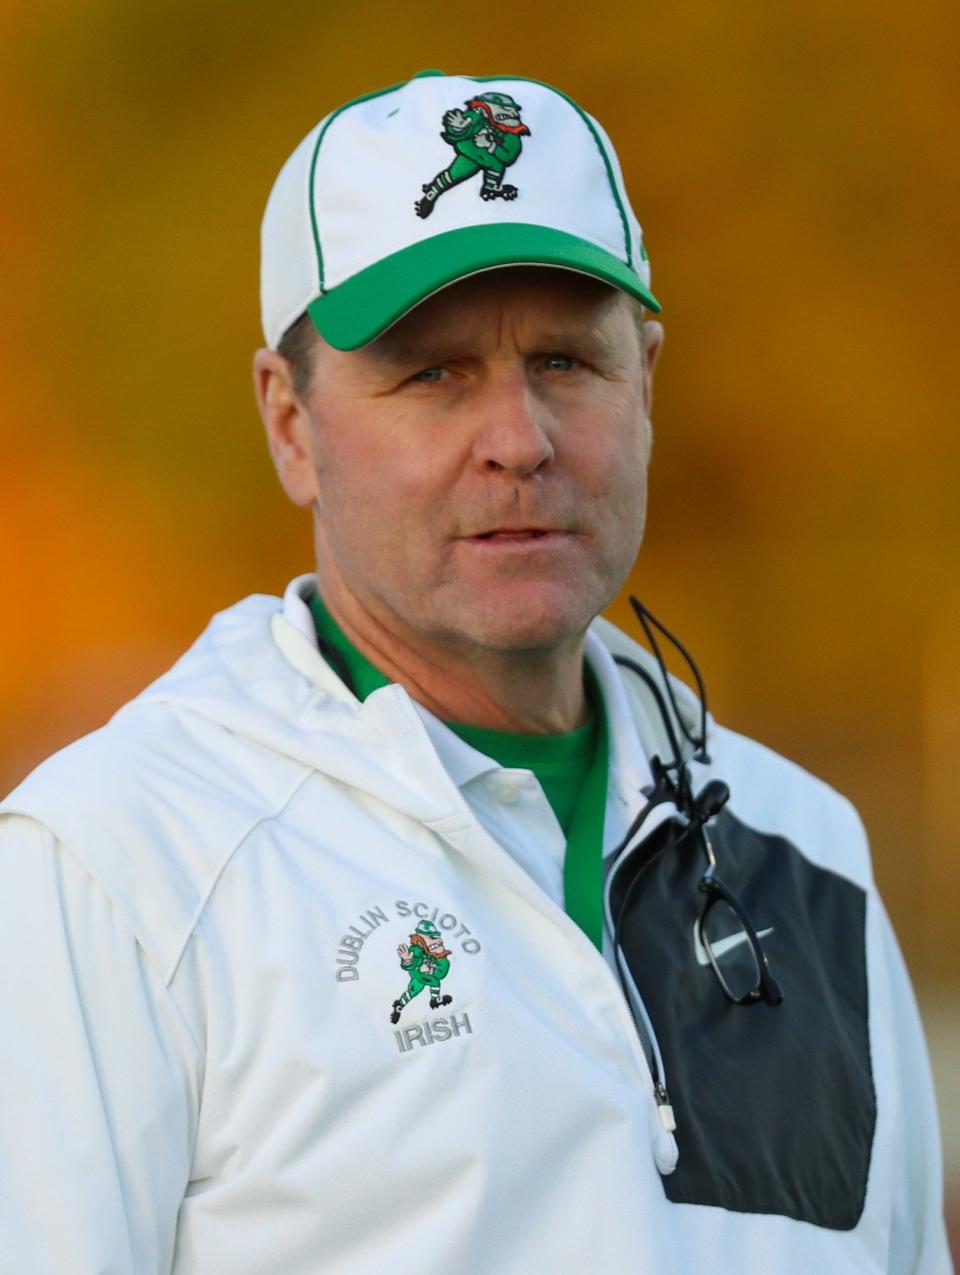 Scioto football coach Karl Johnson has stepped down after 23 seasons. He led the Irish to 12 playoff appearances and was the longest-serving head football coach in the OCC.